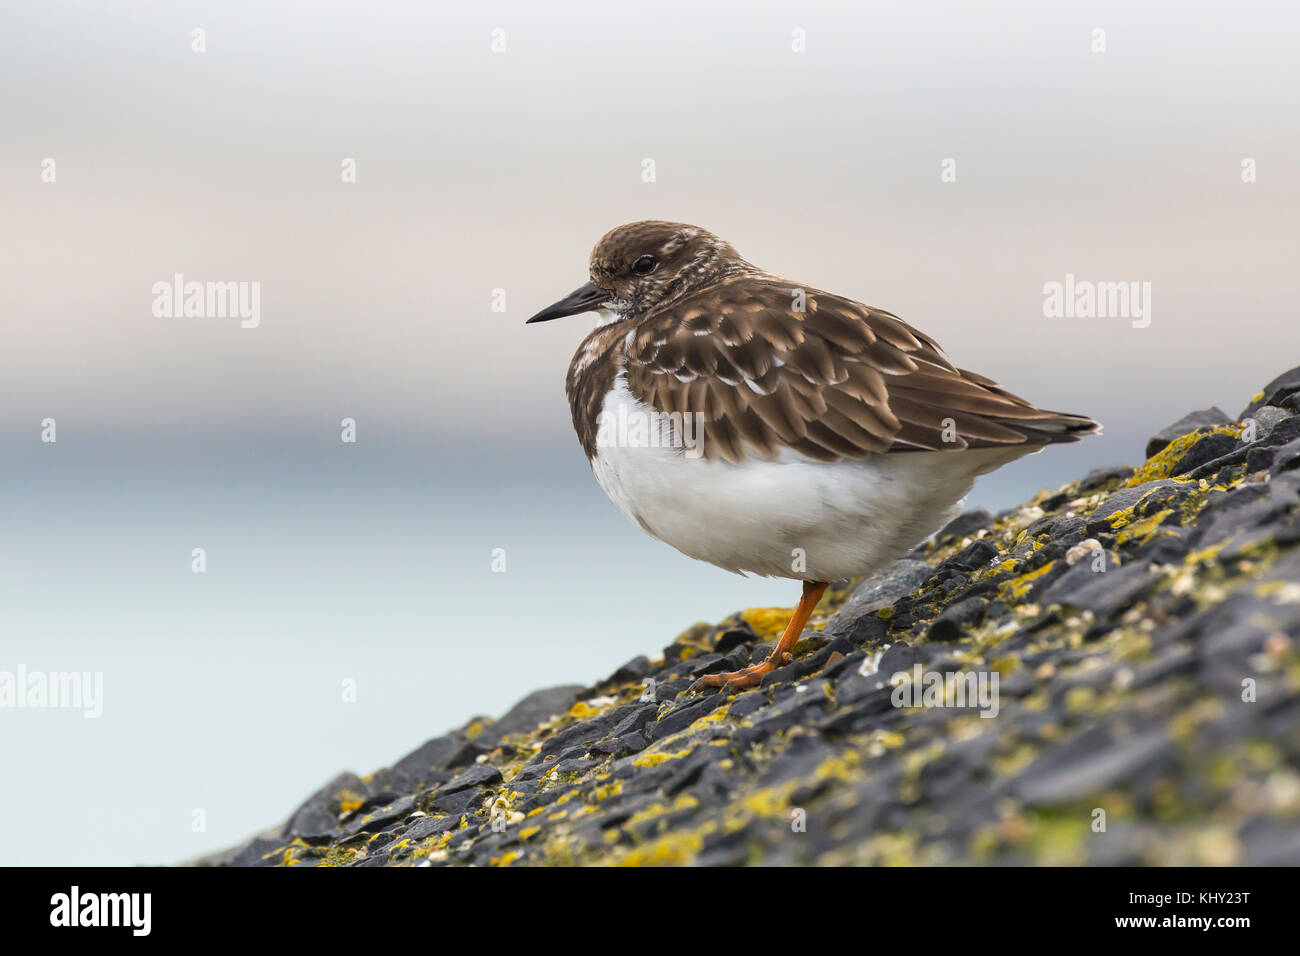 Ruddy turnstone wading bird, Arenaria interpres, foraging in between the rocks at the shore. These birds live in flocks at shore and are migratory. Stock Photo